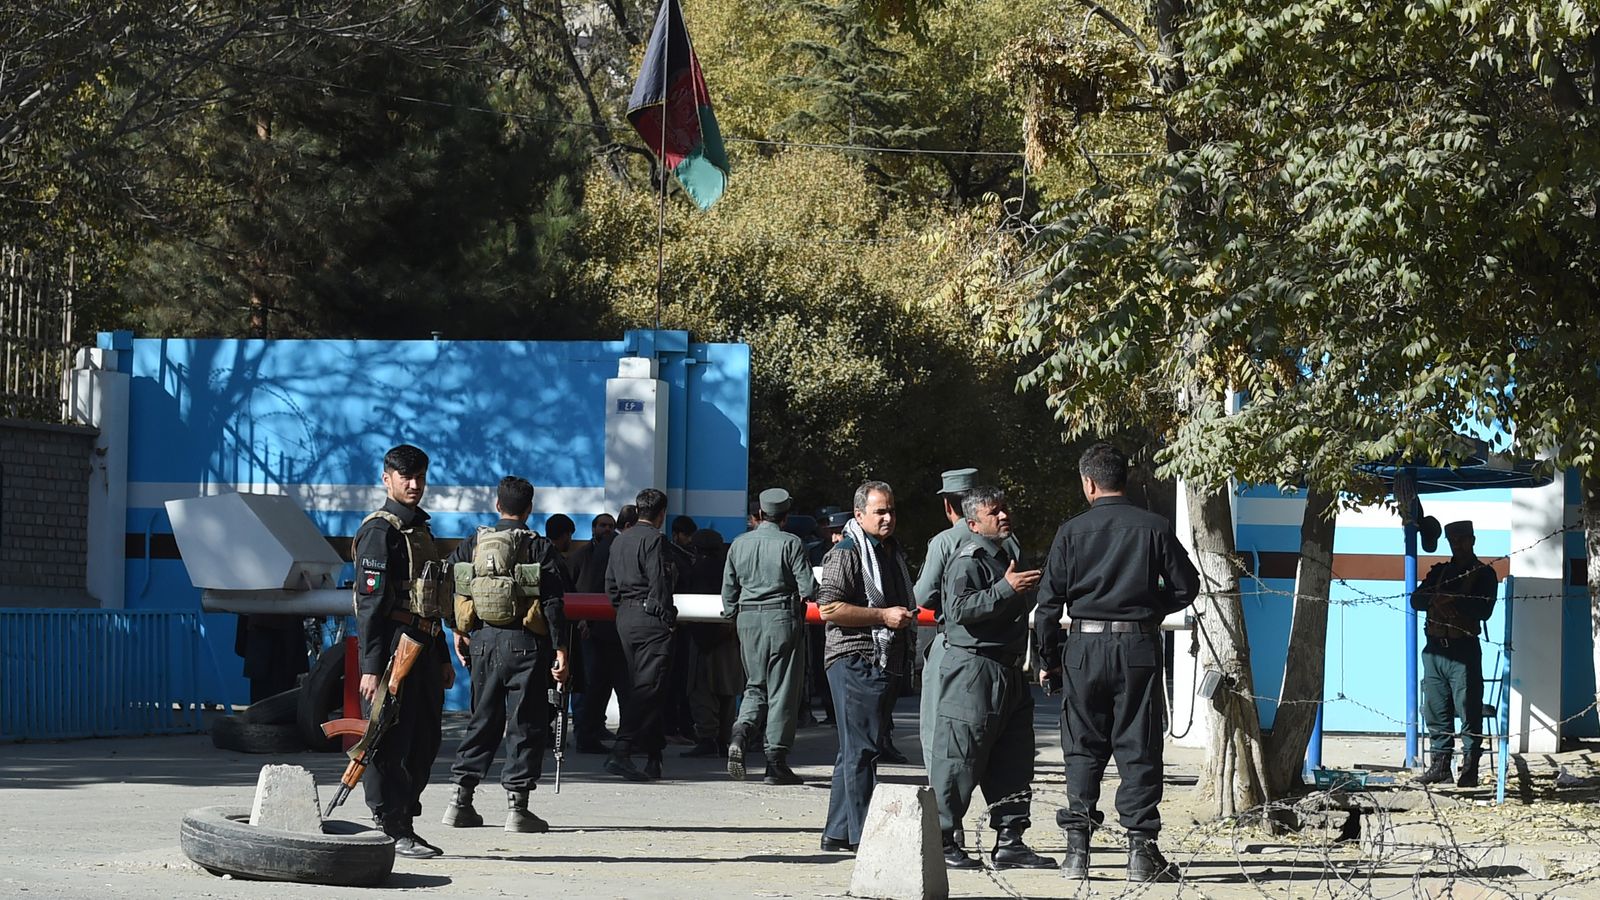 25 people killed or wounded in attack in Kabul University